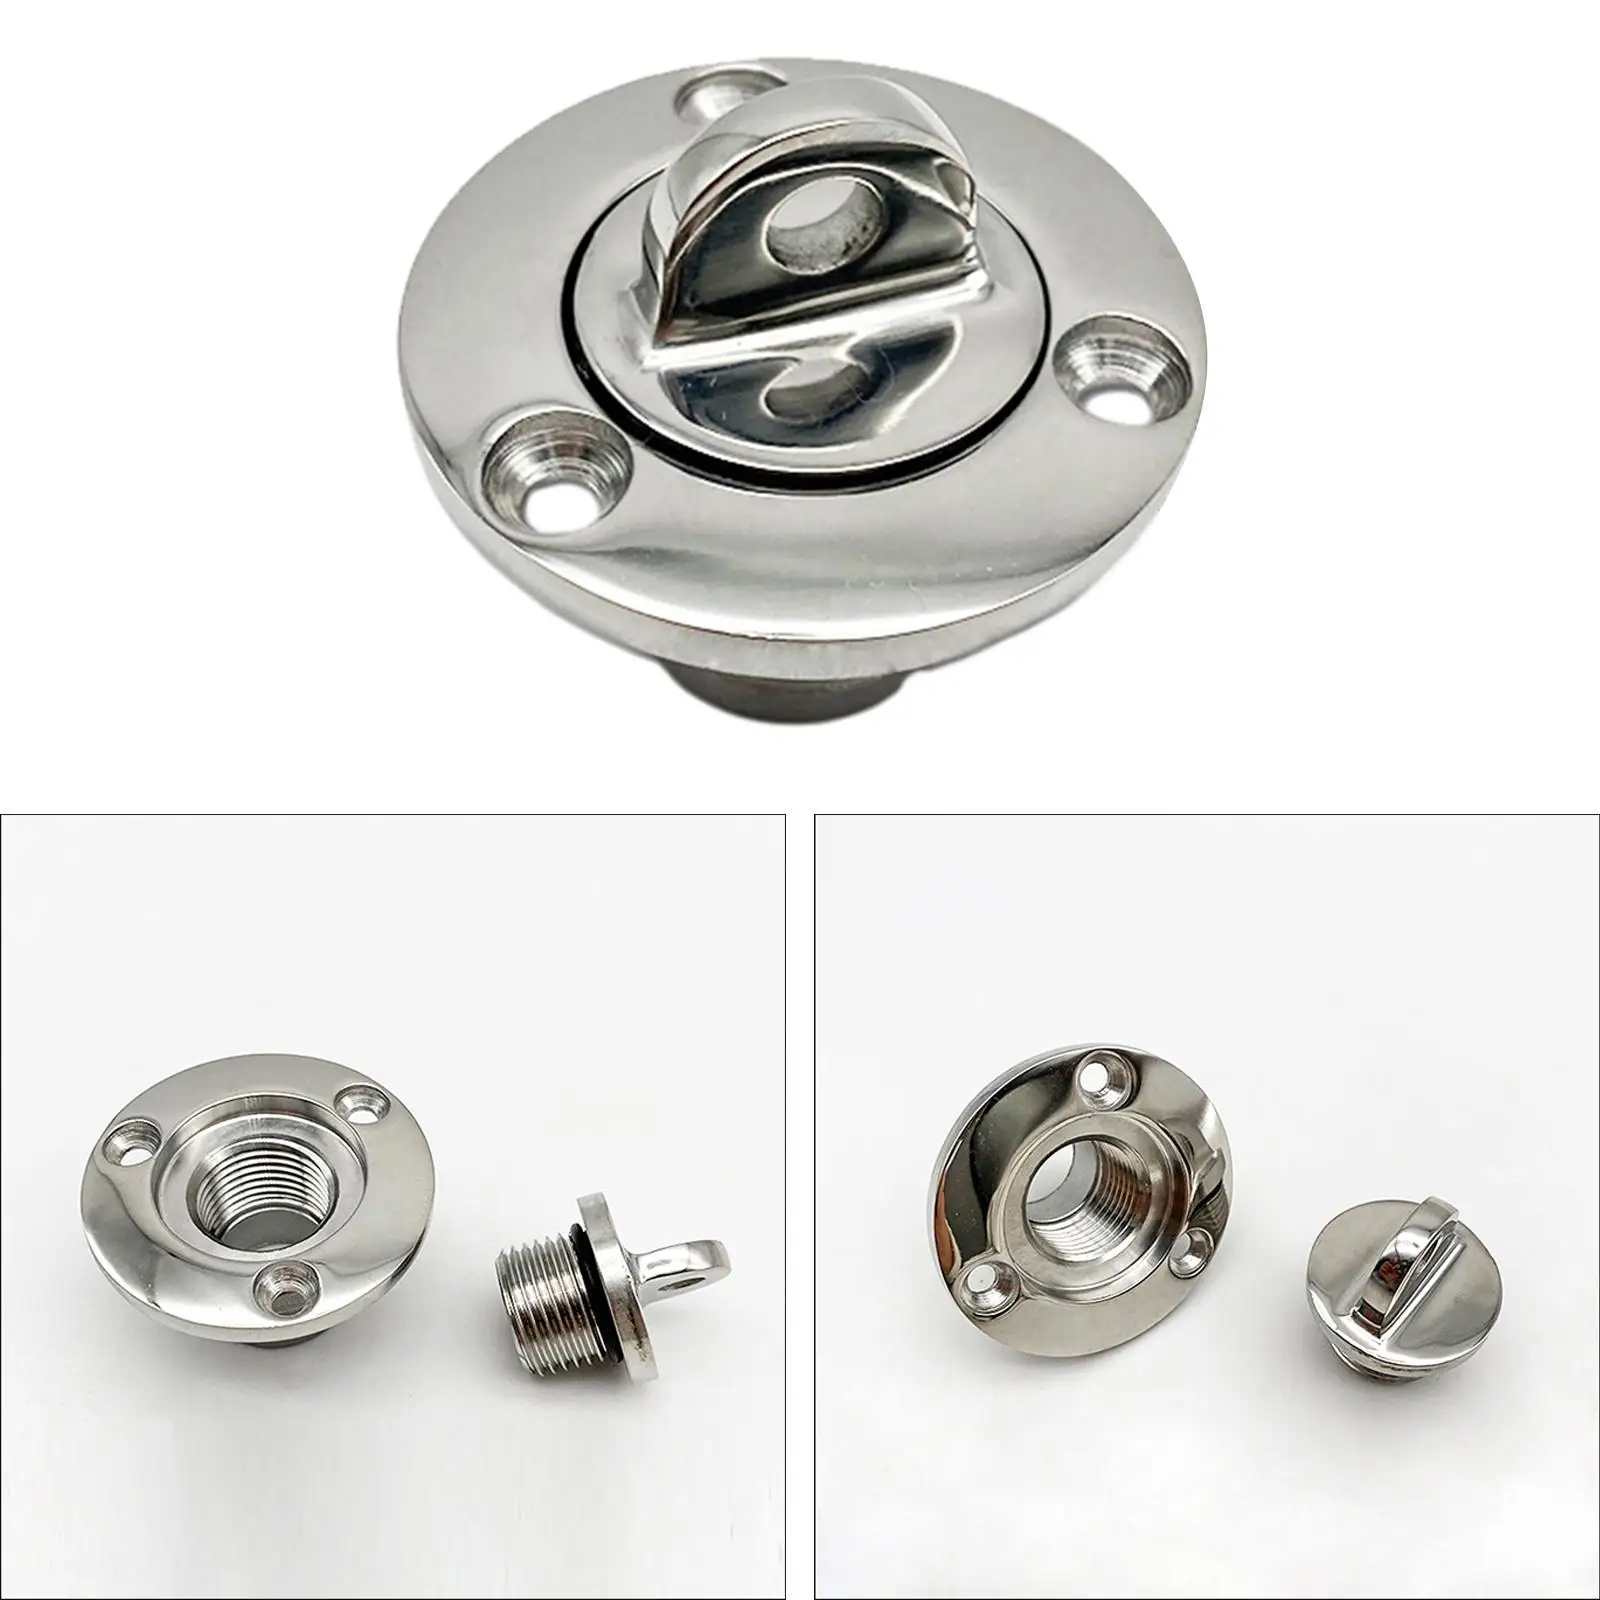 Boat Drain Plug Stainless Steel 1 inch with Screws Round Boat Transom Drain Plug for Ship Kayak Canoe Marine Boats Accessories